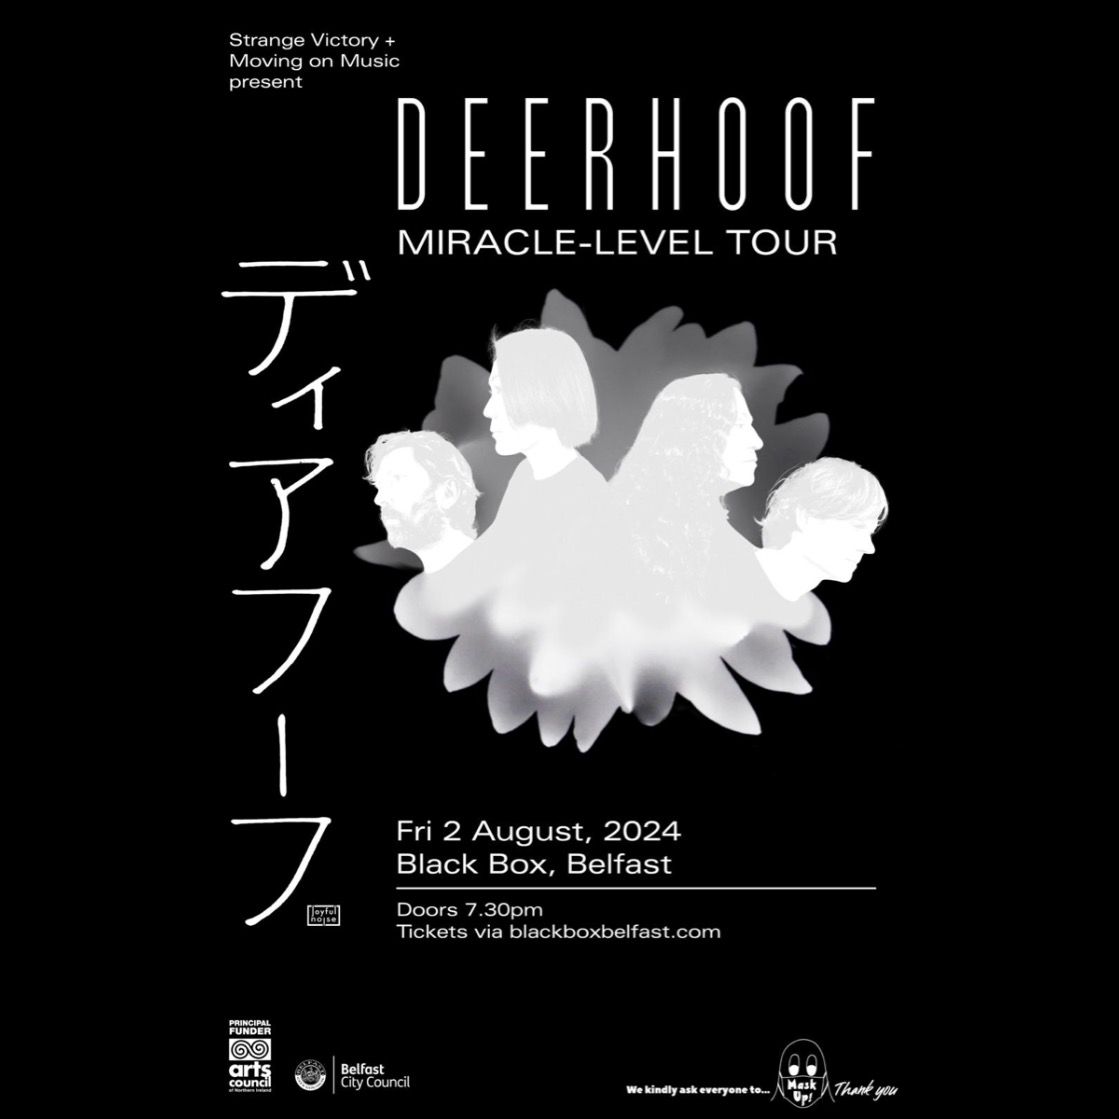 Buzzed to bring @deerhoof back to The @BlackBoxBelfast with our good friends at @strangevictory ⚡️🥁 A tremendous live band - You'll leave this one smiling! 😃 Fri 2nd Aug / 7.30pm blackboxbelfast.com/event/deerhoof/